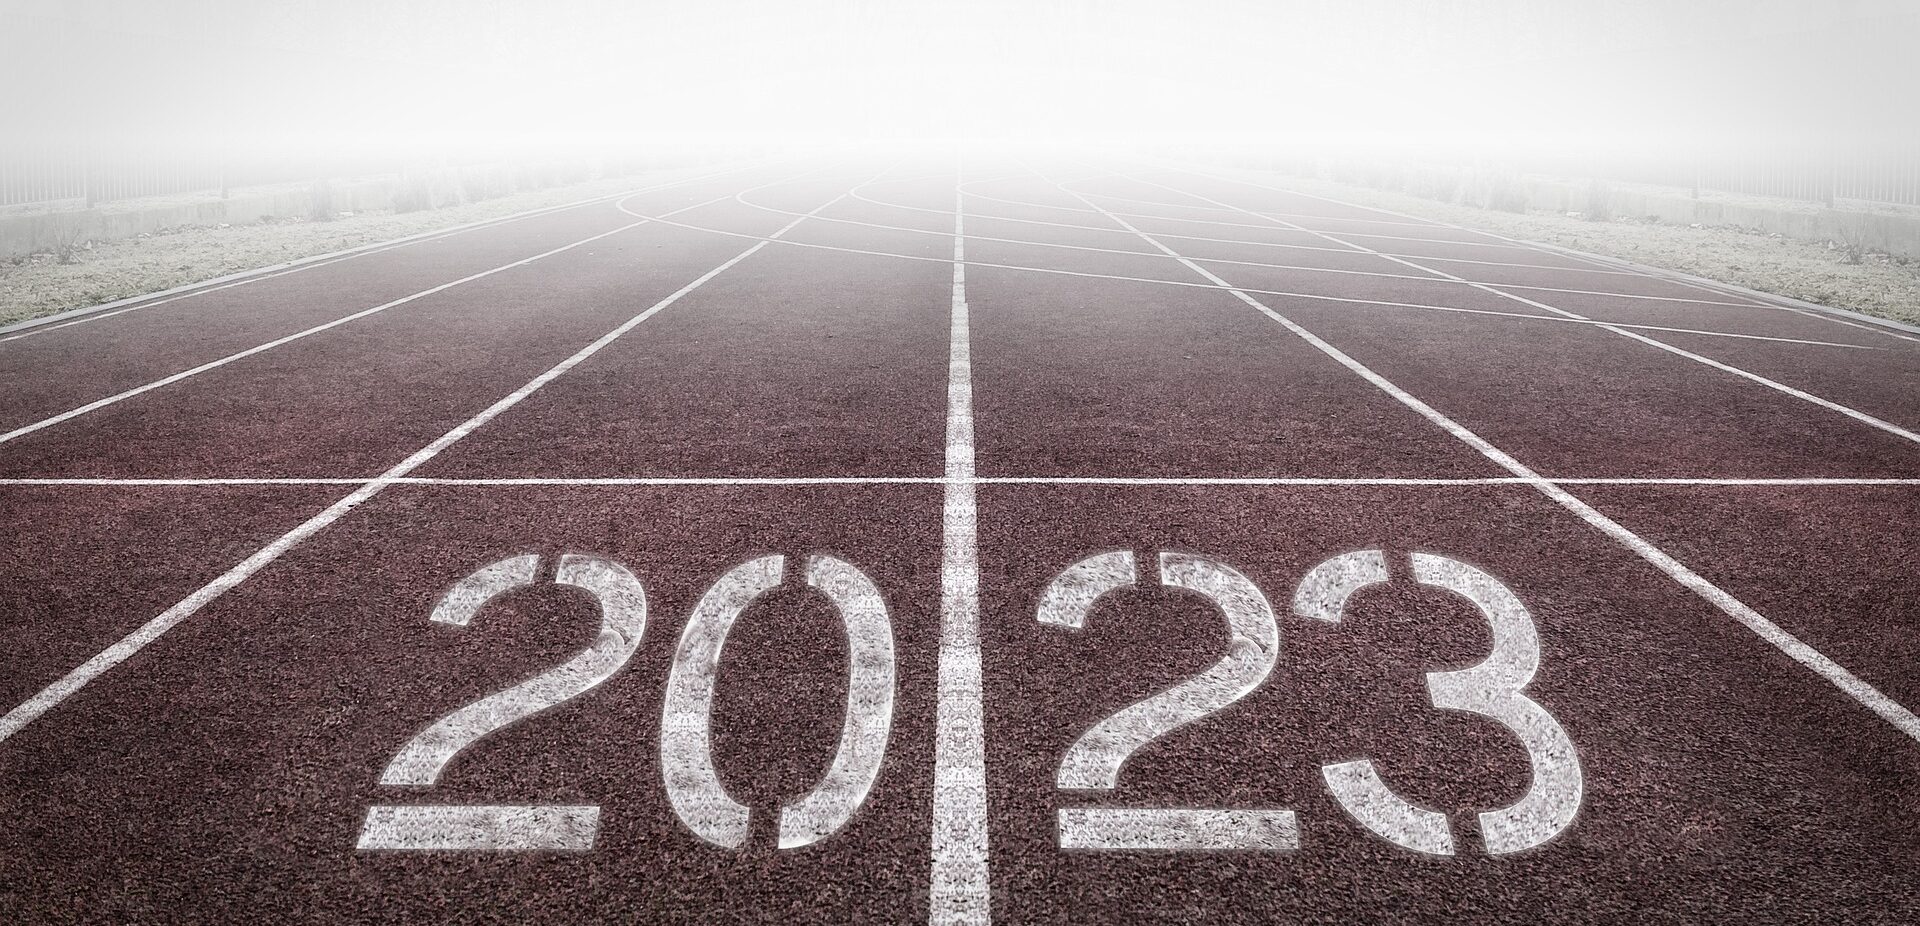 Reflections on 2022 and advice for the year ahead